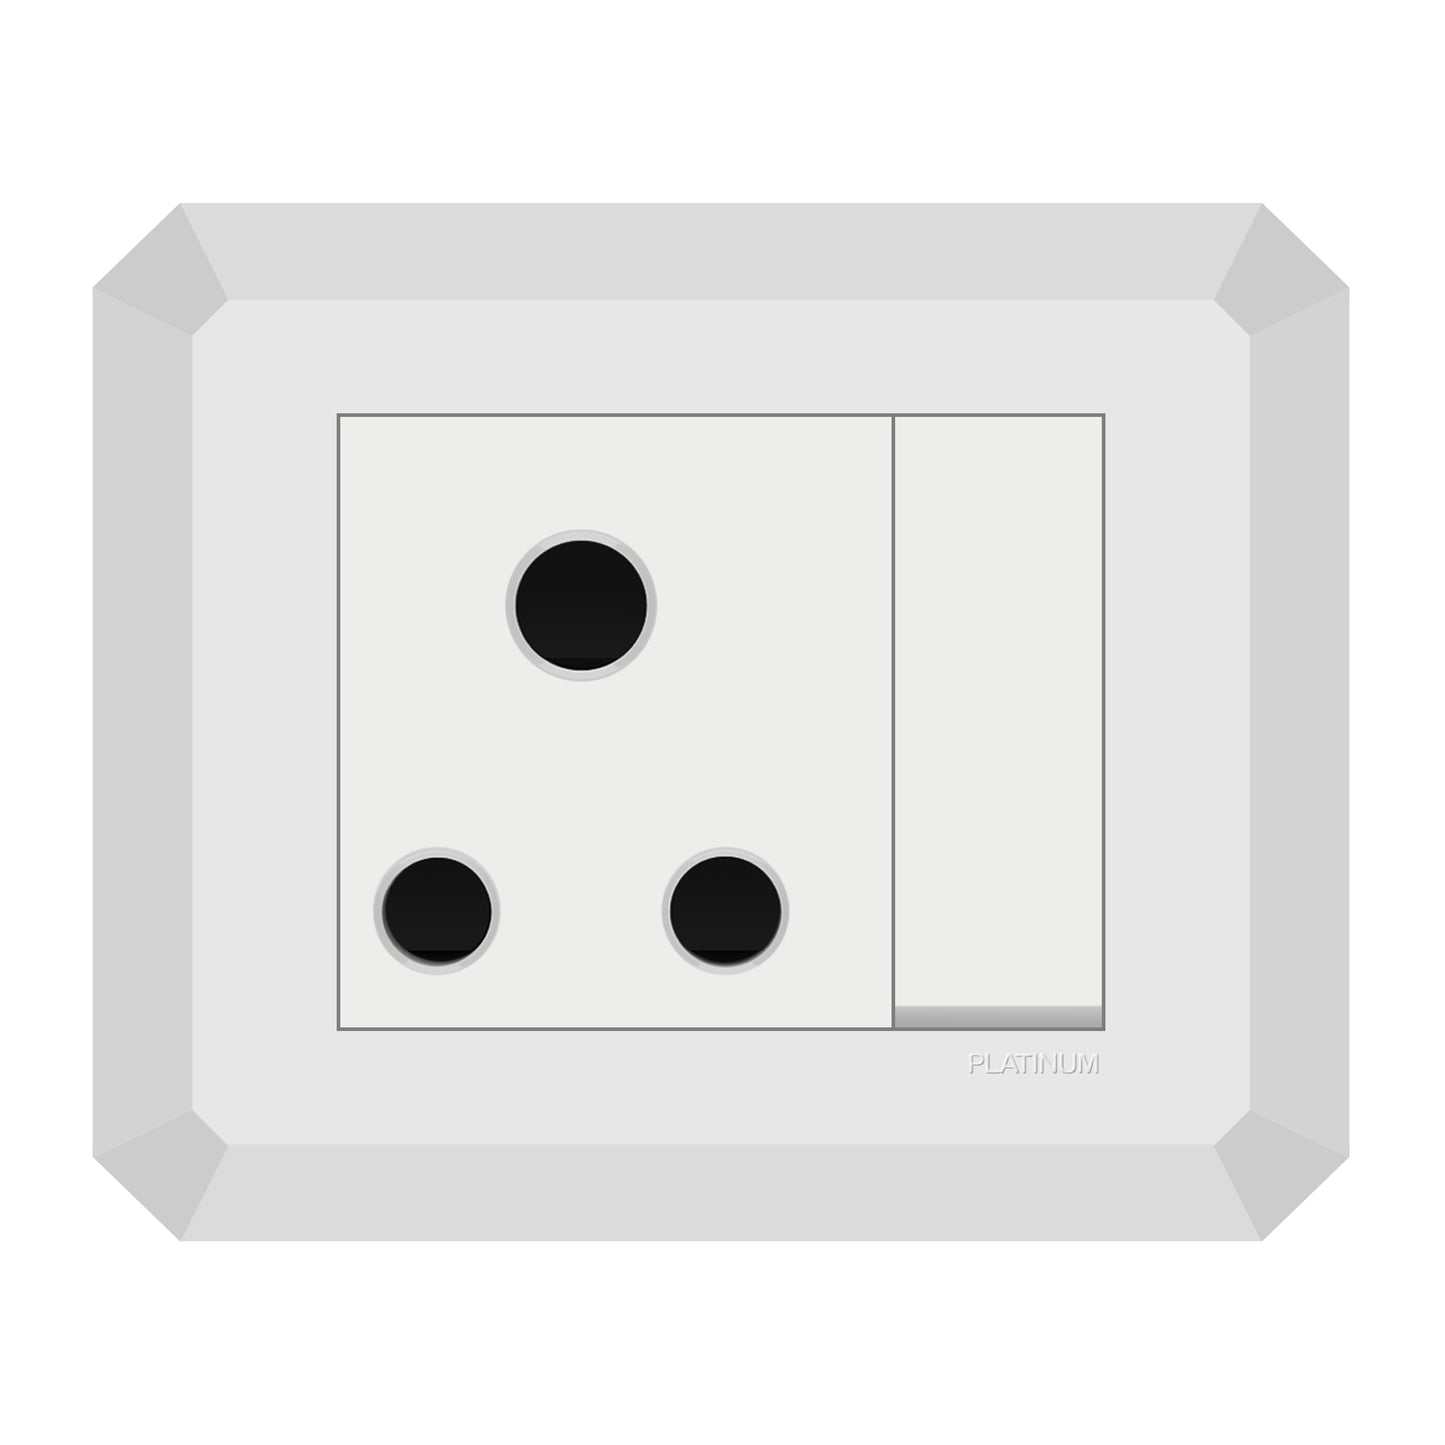 16A 3 pin Round Switched Socket Outlet (Platinum Electrical Wiring Devices)